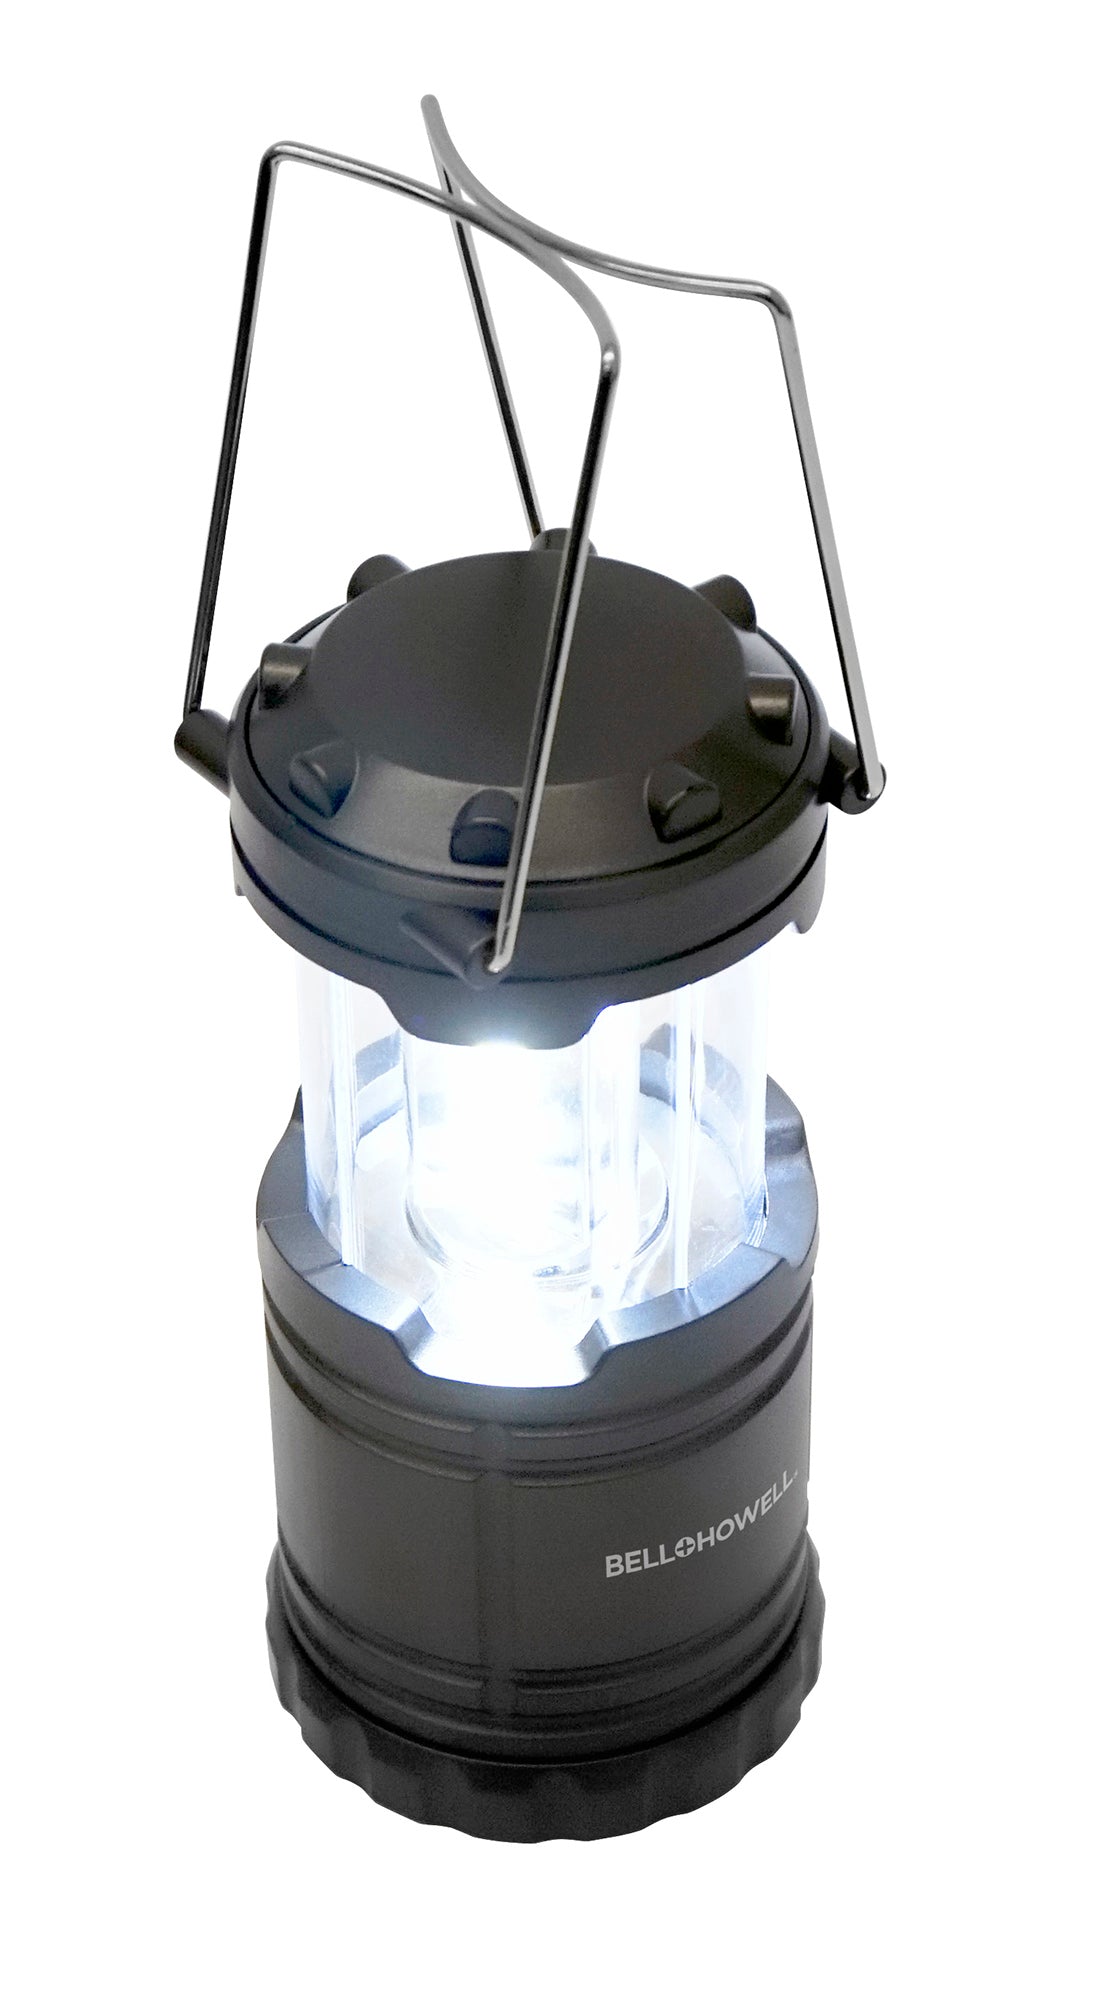 Bell + Howell Collapsible Portable Power Fan Lantern 300 Lumens & Reviews